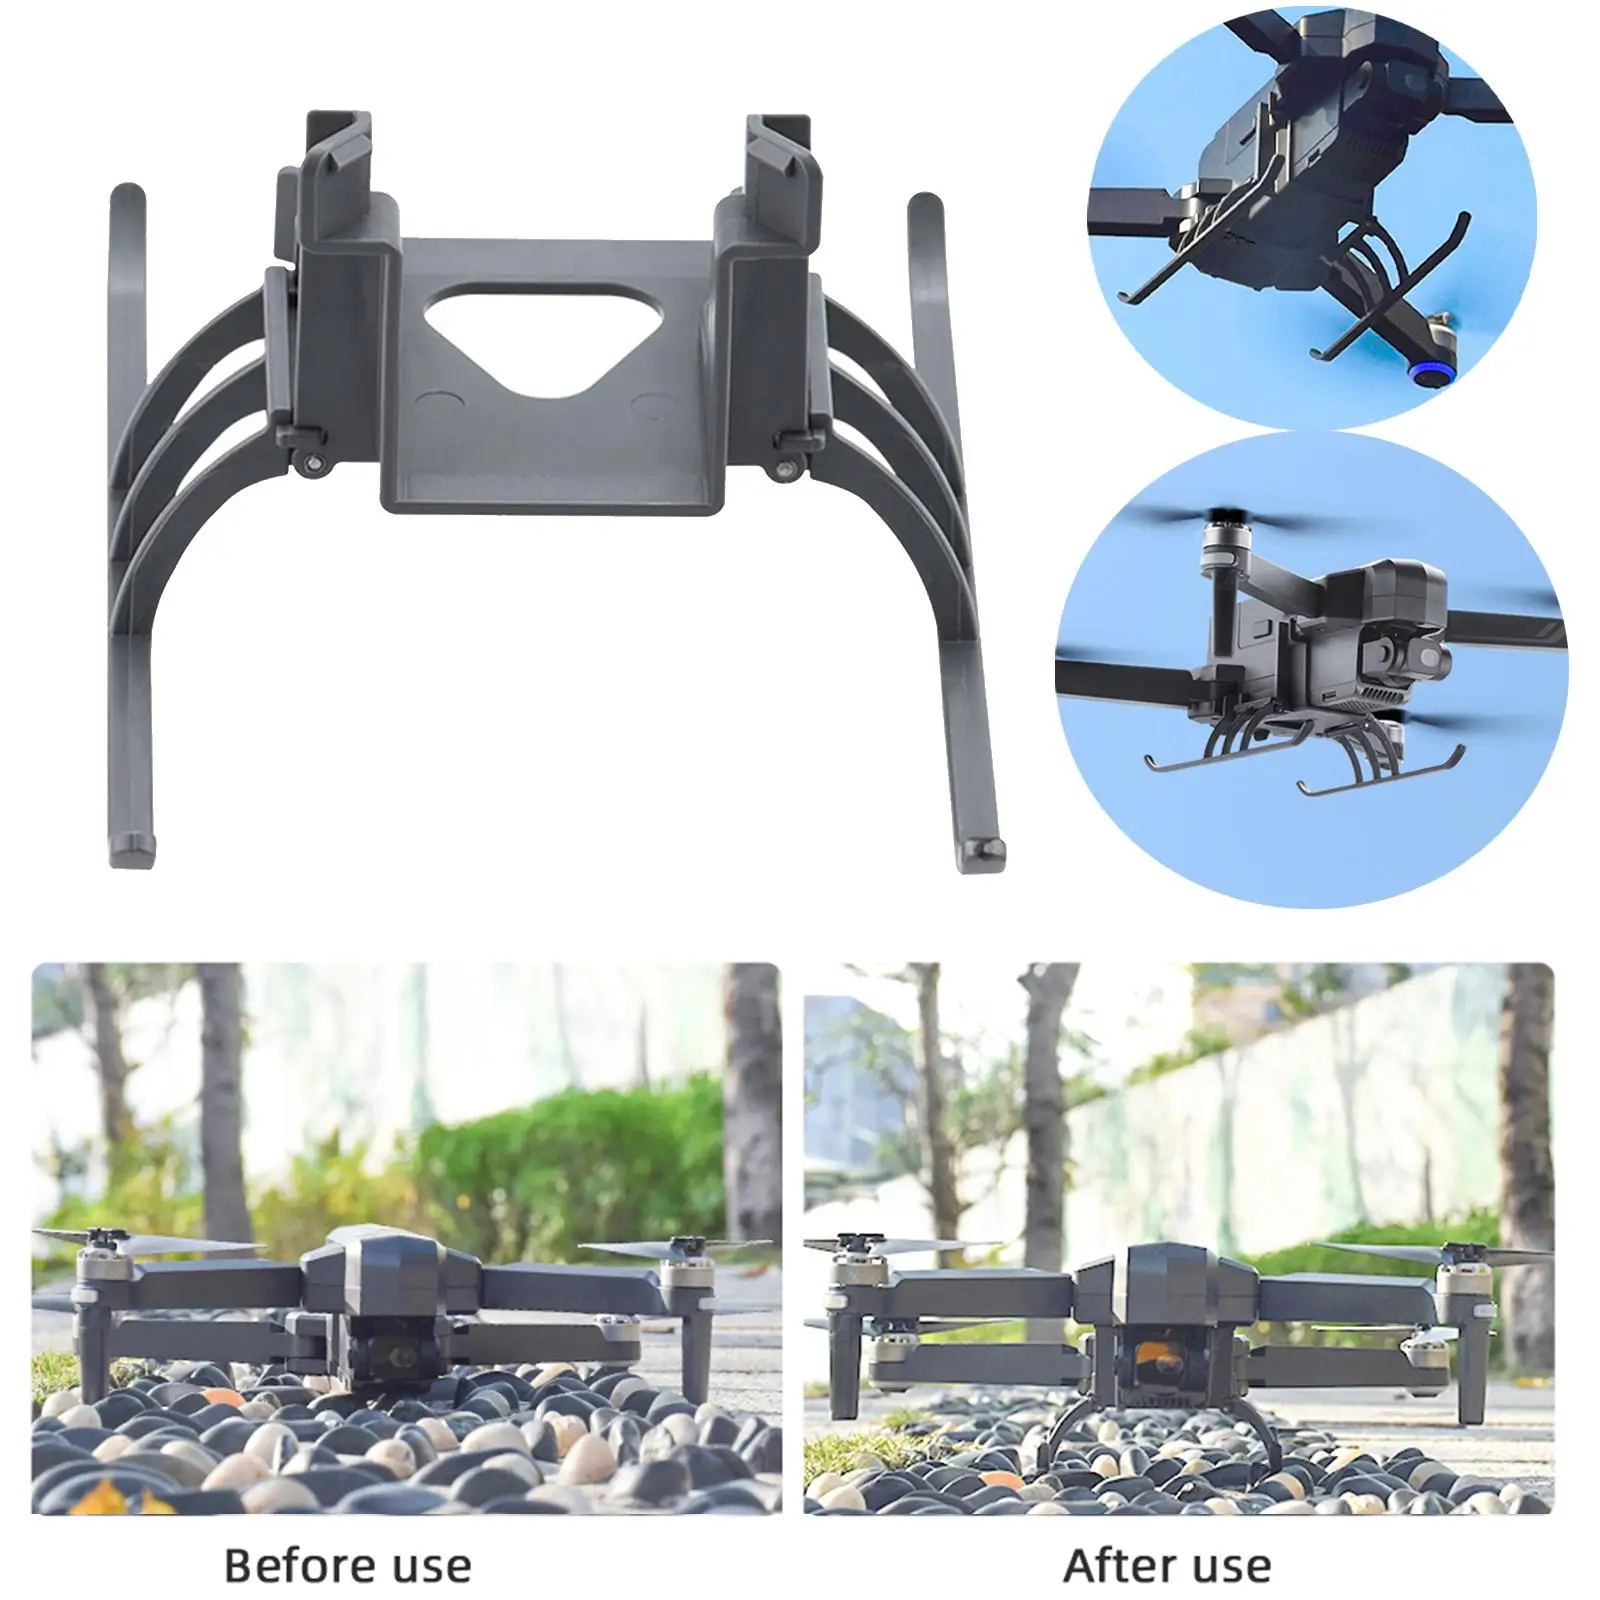 Landing Gear Leg Gimbal Guard Protector Feet Extensions Heightened Extended for Sjrc F11S Drone Increase Height 29mm Portable